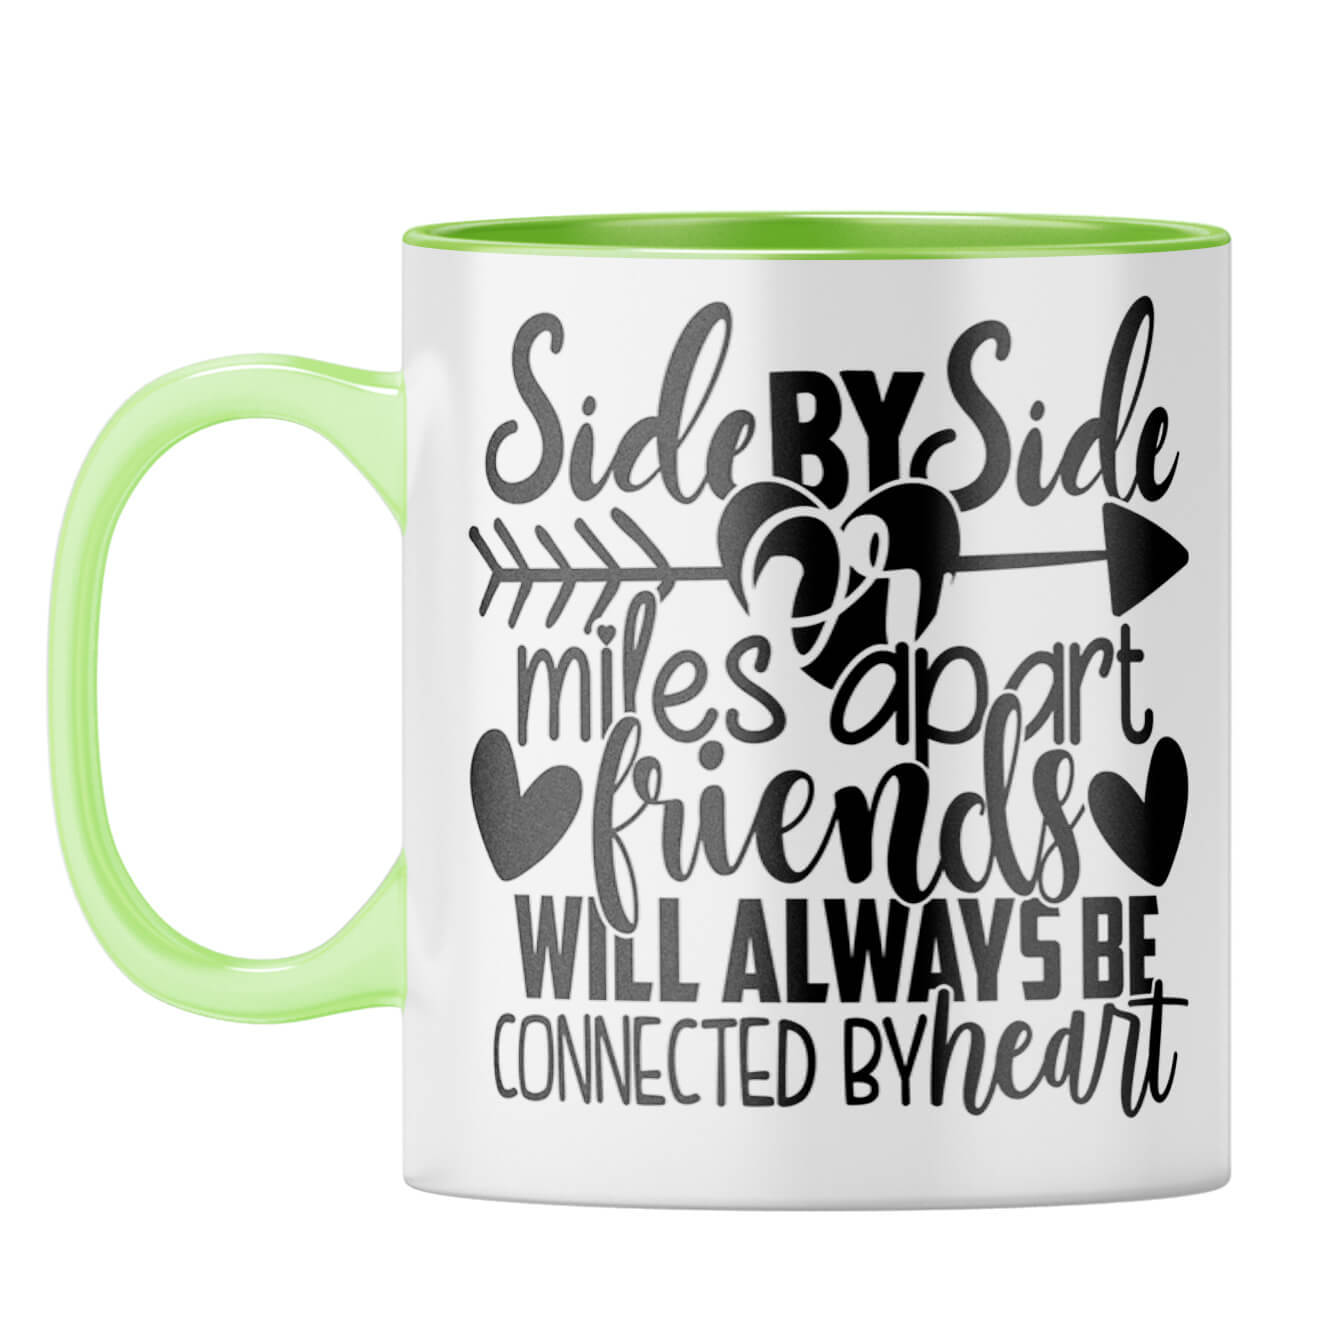 Friends Connected By Heart Coffee Mug Light Green